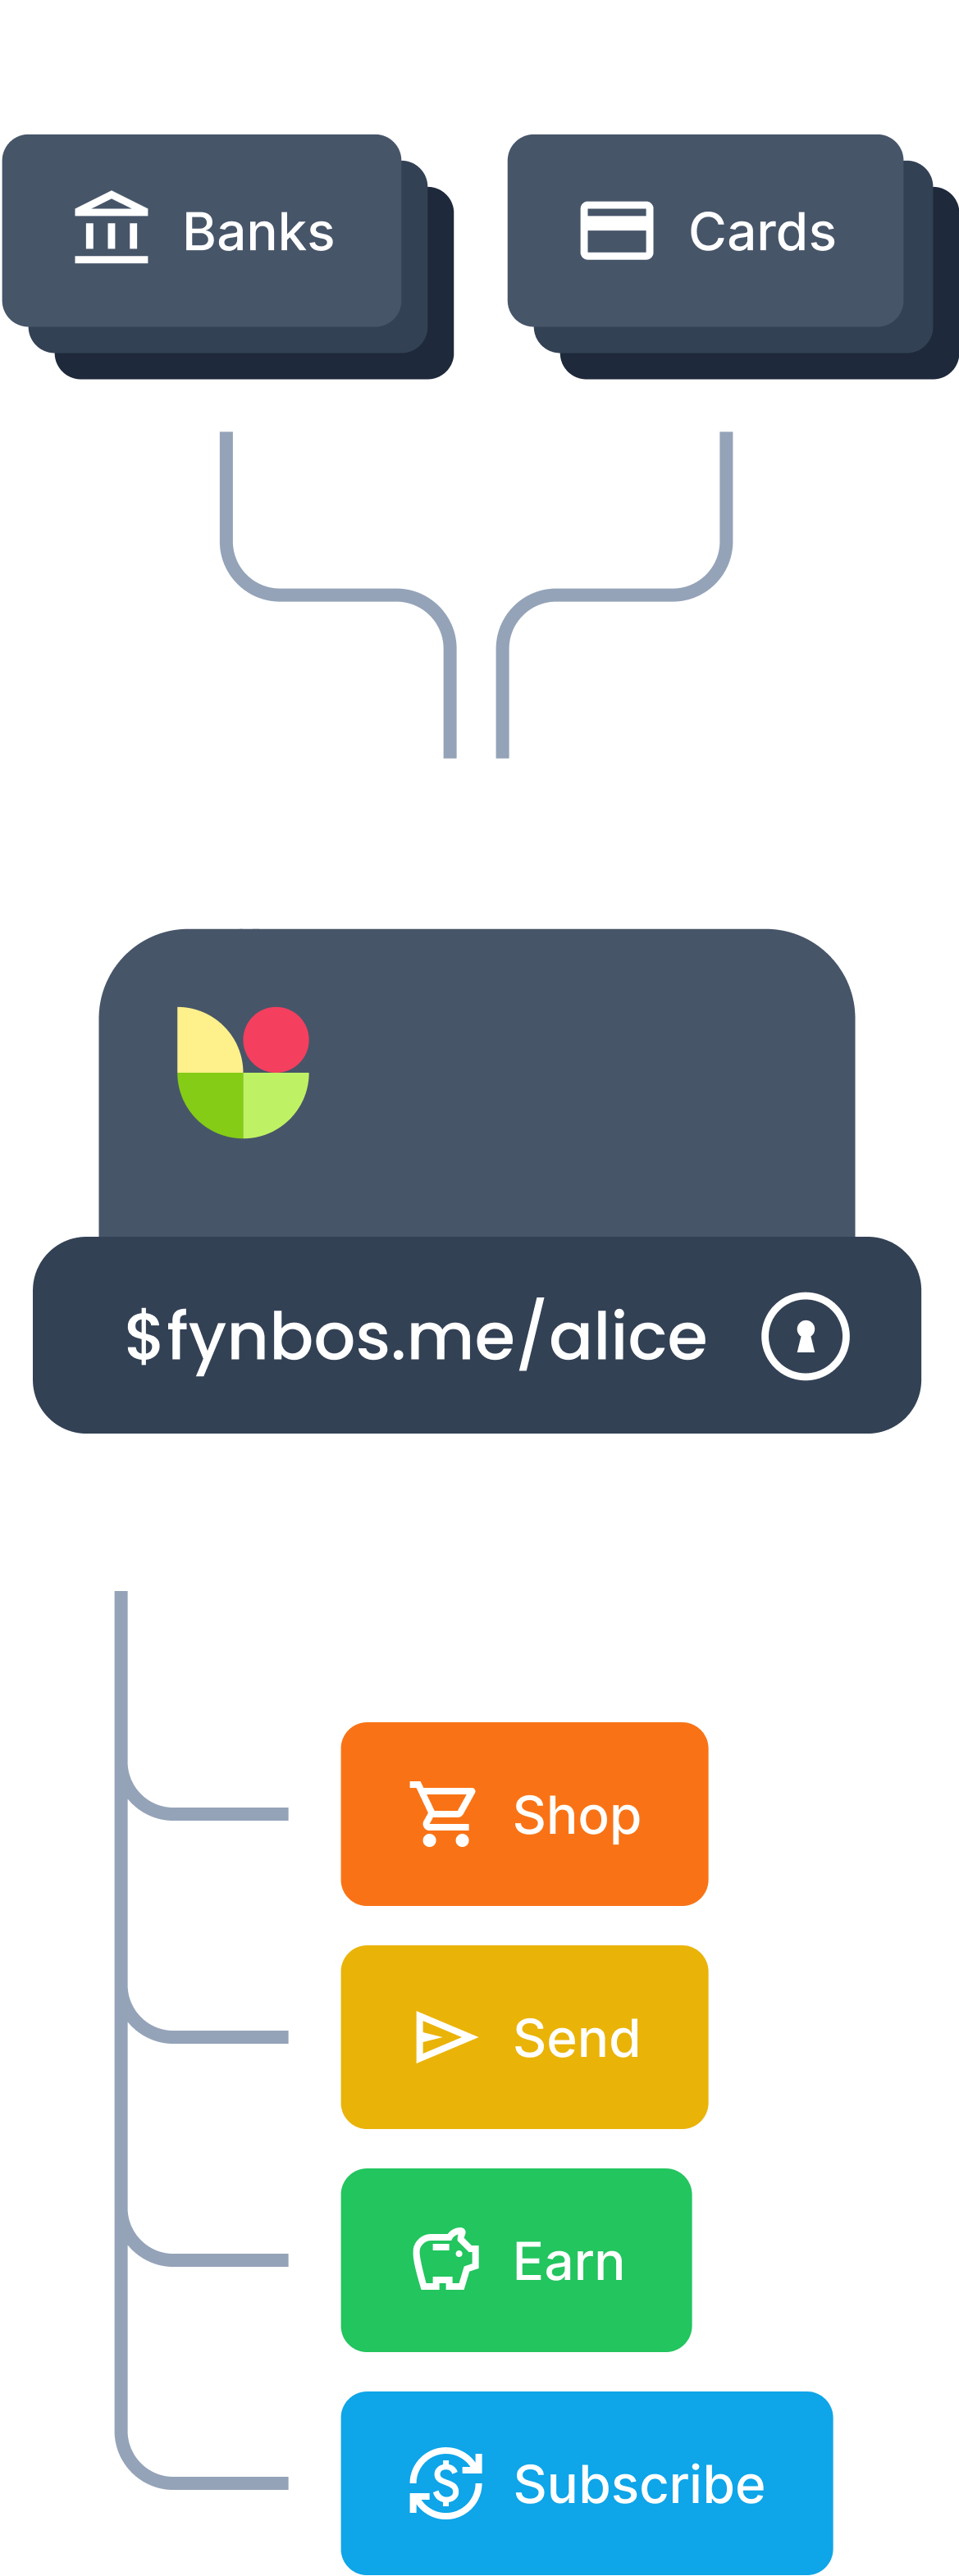 What is a payment pointer